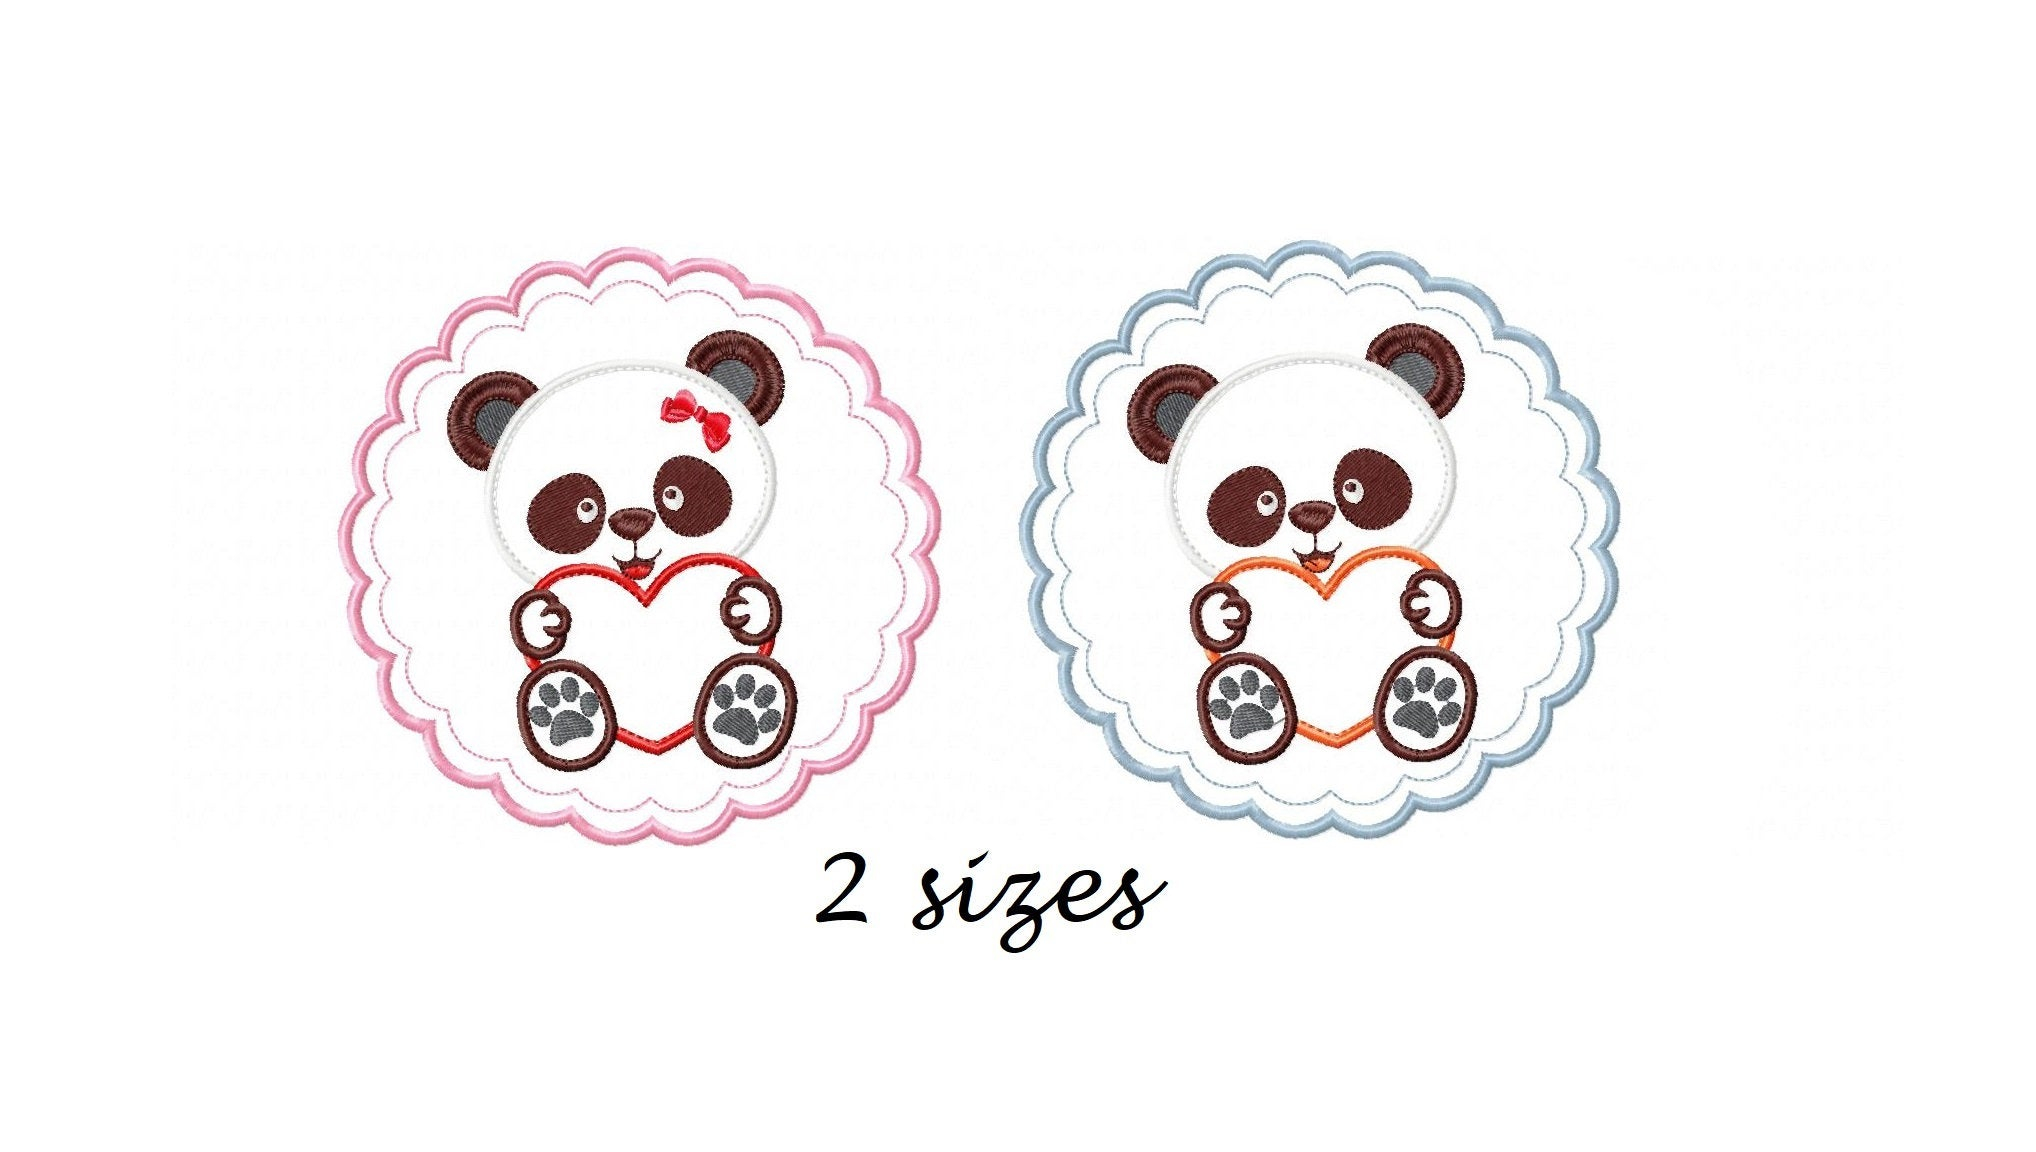 Baby Embroidery Patterns Panda Embroidery Designs Animal Embroidery Design Machine Embroidery Pattern Ba Embroidery File Kid Embroidery Applique Design Bow